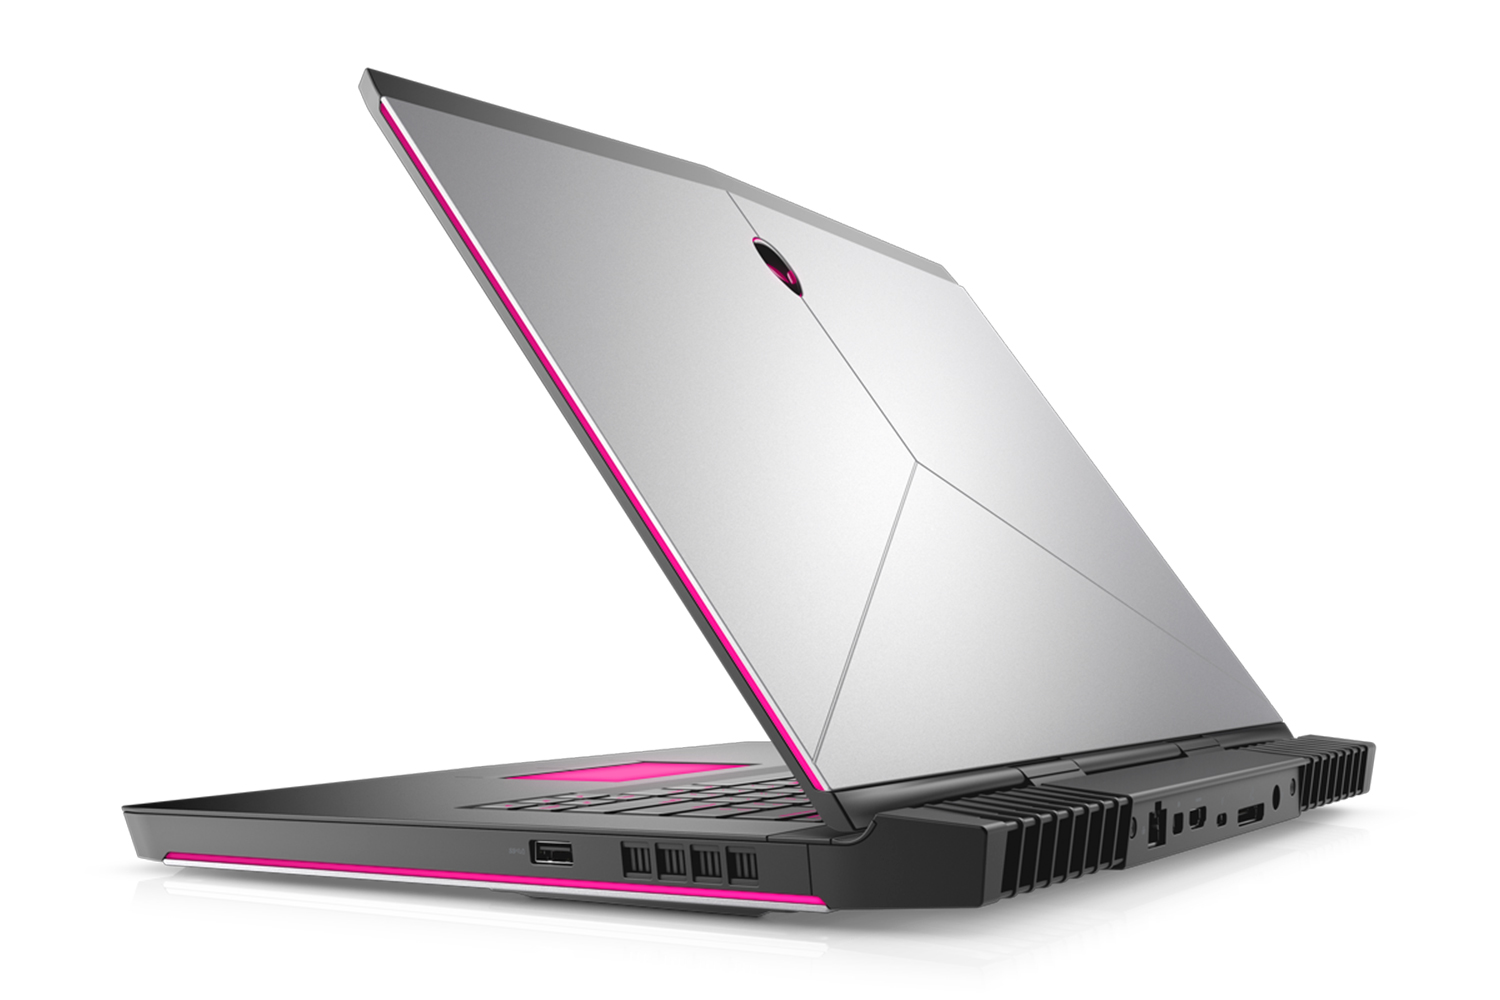 dell alienware inspiron 7000 gaming laptops refresh intel seventh gen cpu aw 15 06